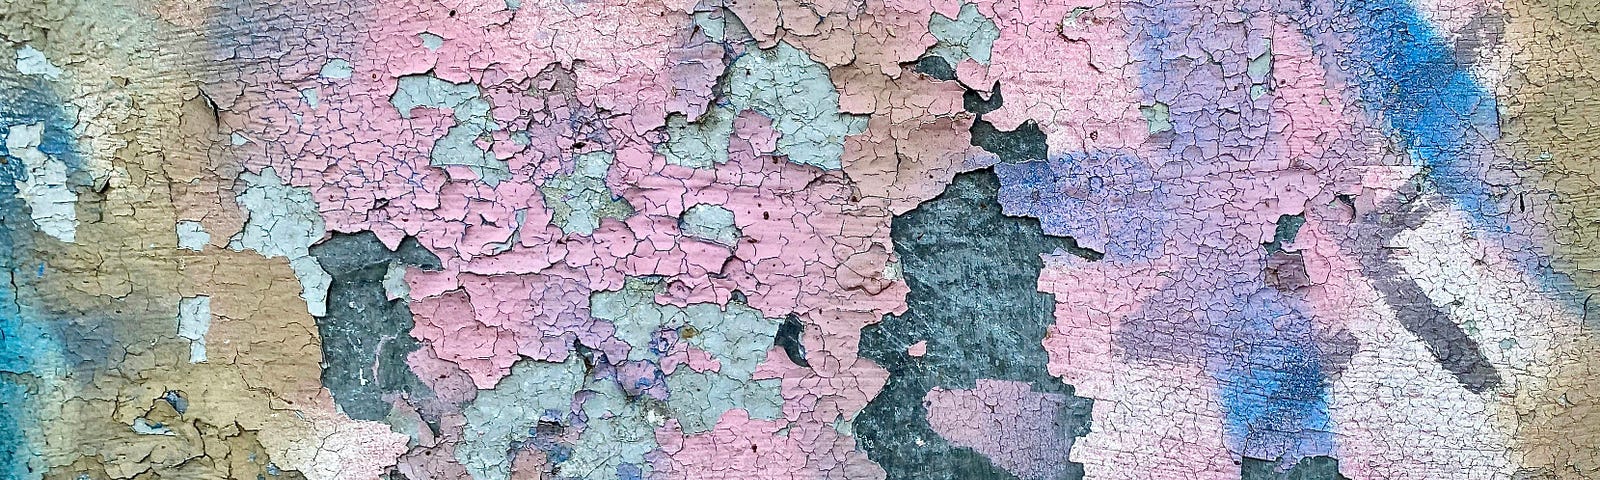 different colors of paint chipping from a wall